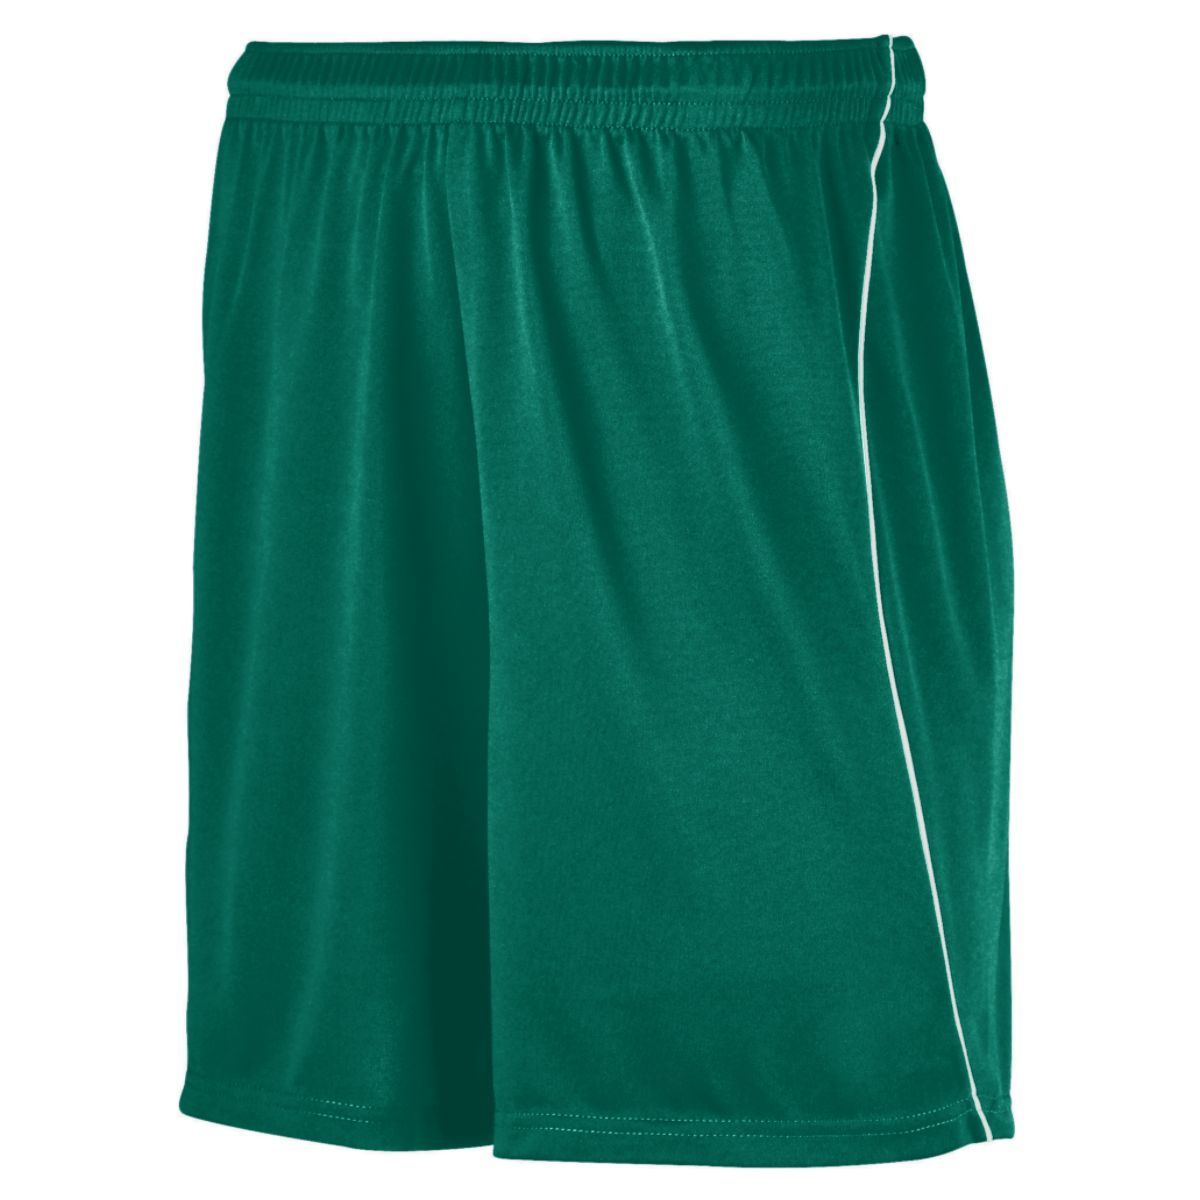 Augusta Sportswear Youth Wicking Soccer Shorts With Piping in Dark Green/White  -Part of the Youth, Youth-Shorts, Augusta-Products, Soccer, All-Sports-1 product lines at KanaleyCreations.com